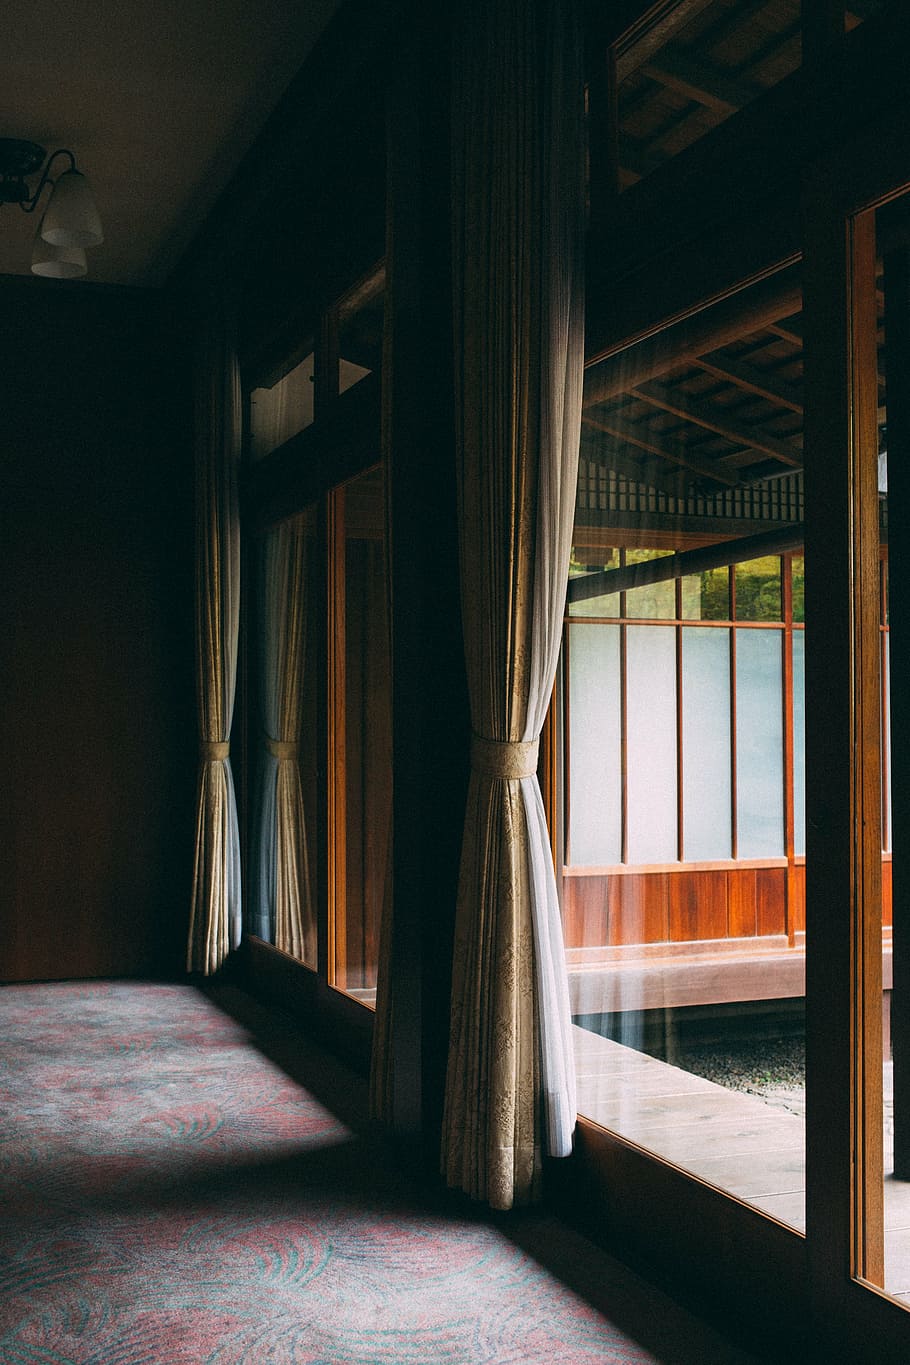 brown, curtain, window, house, architecture, room, glass, interior, floor, indoors